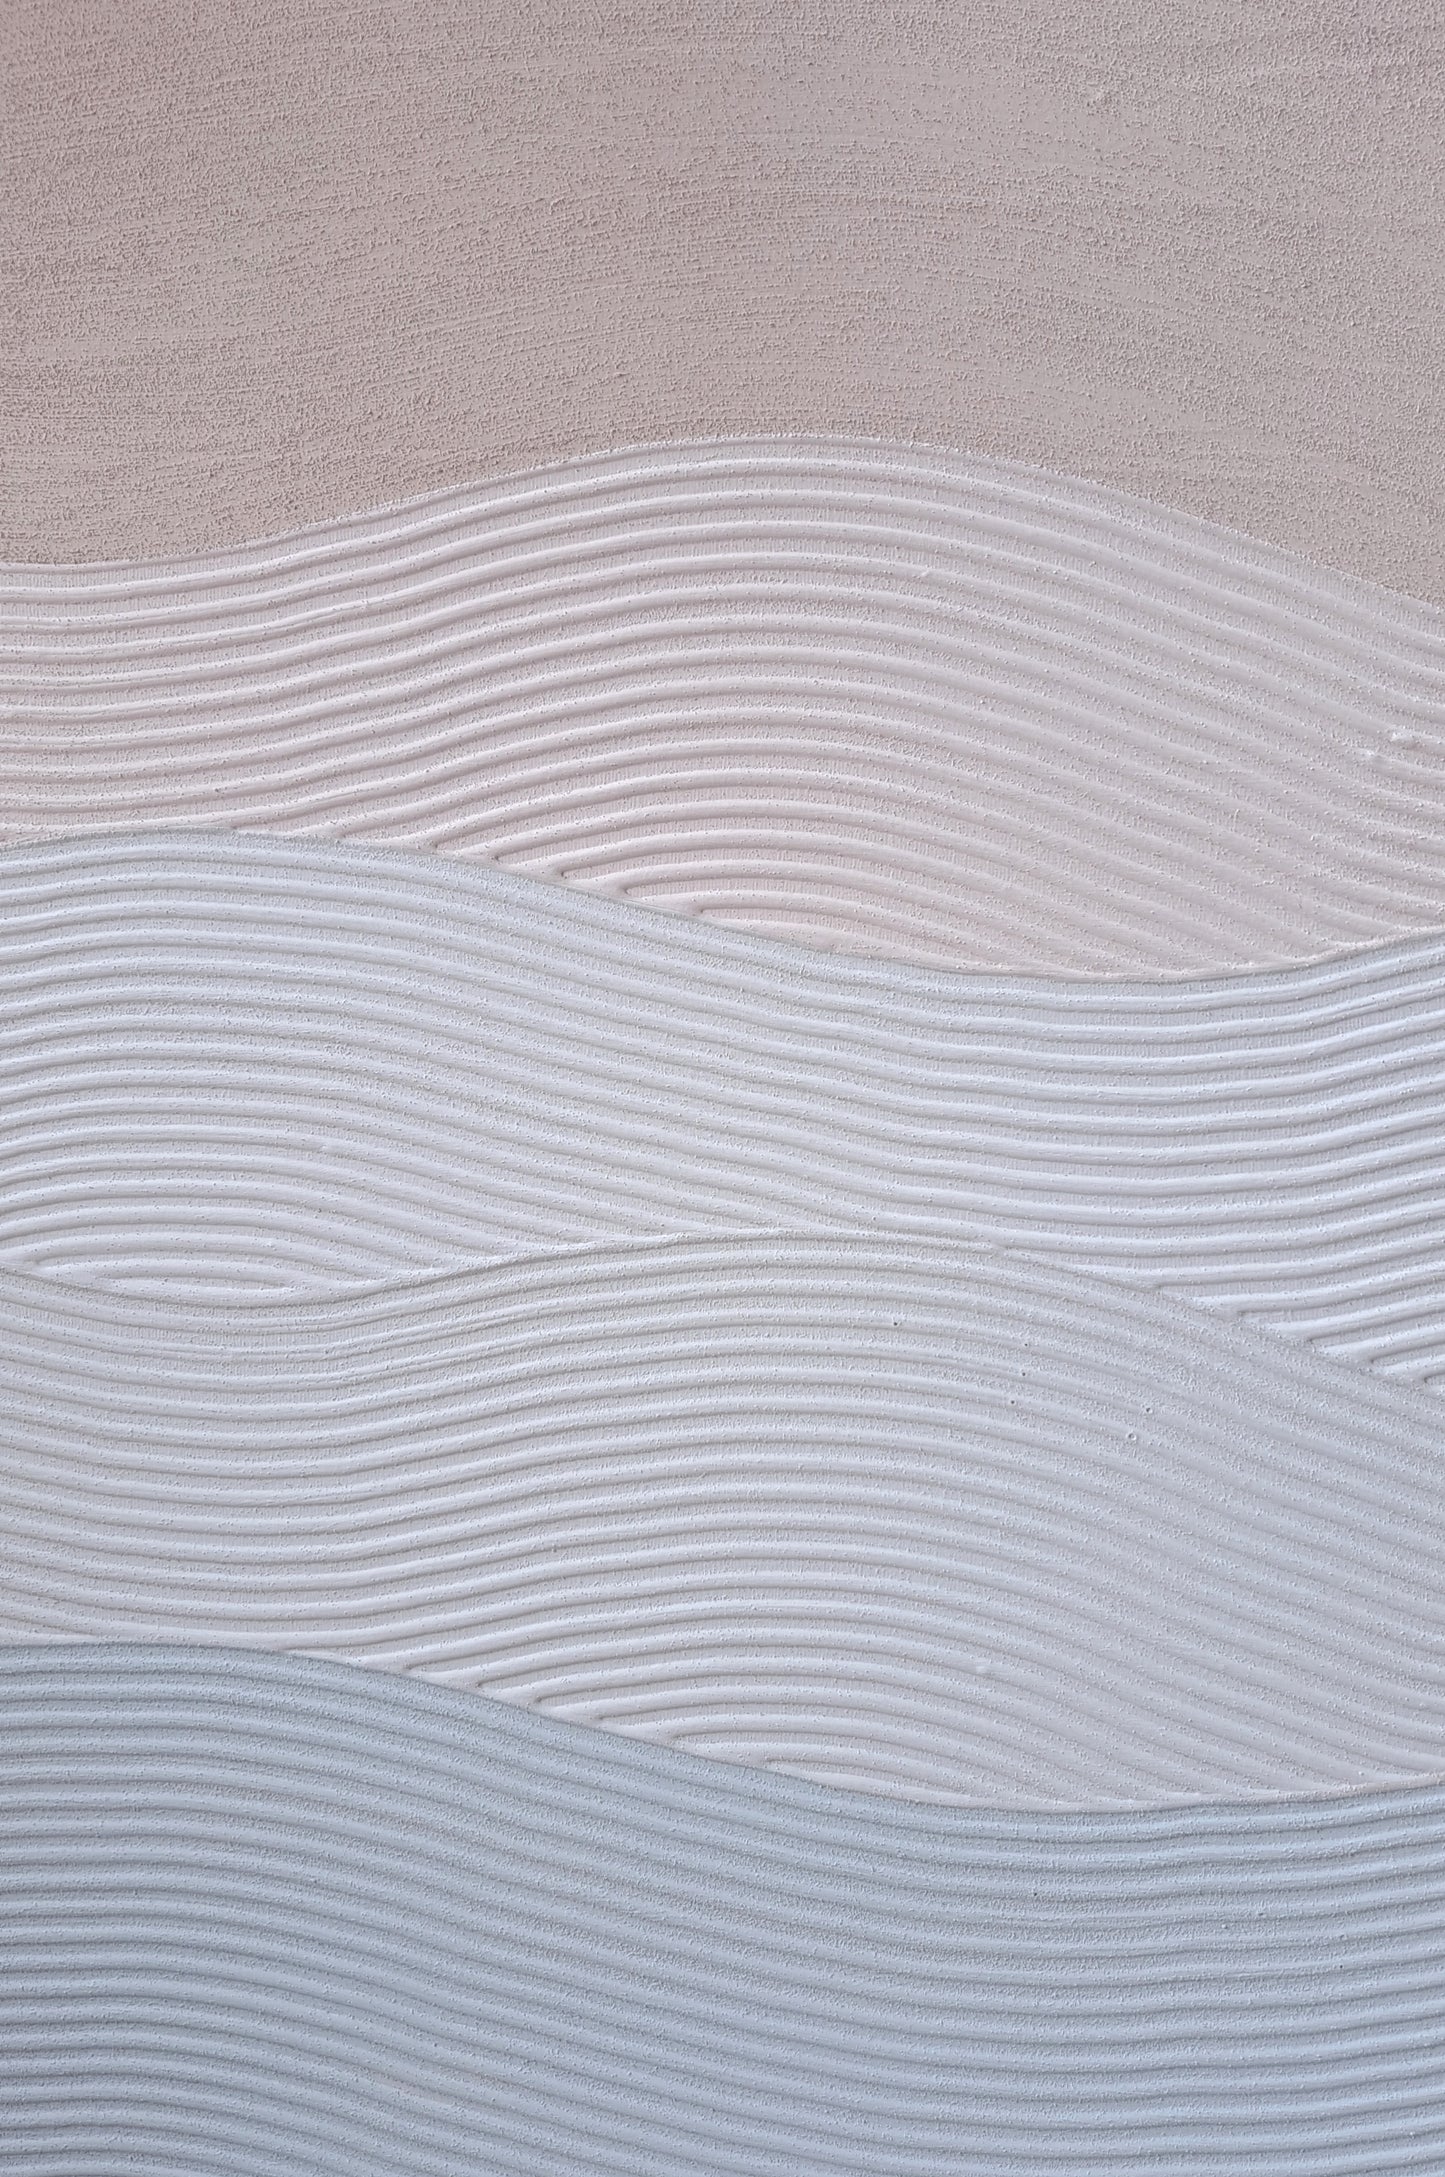 This gradient wave textured piece is made with sand for an authentic beachy feel. Highly textured, with colours ranging from light beige to light blue.